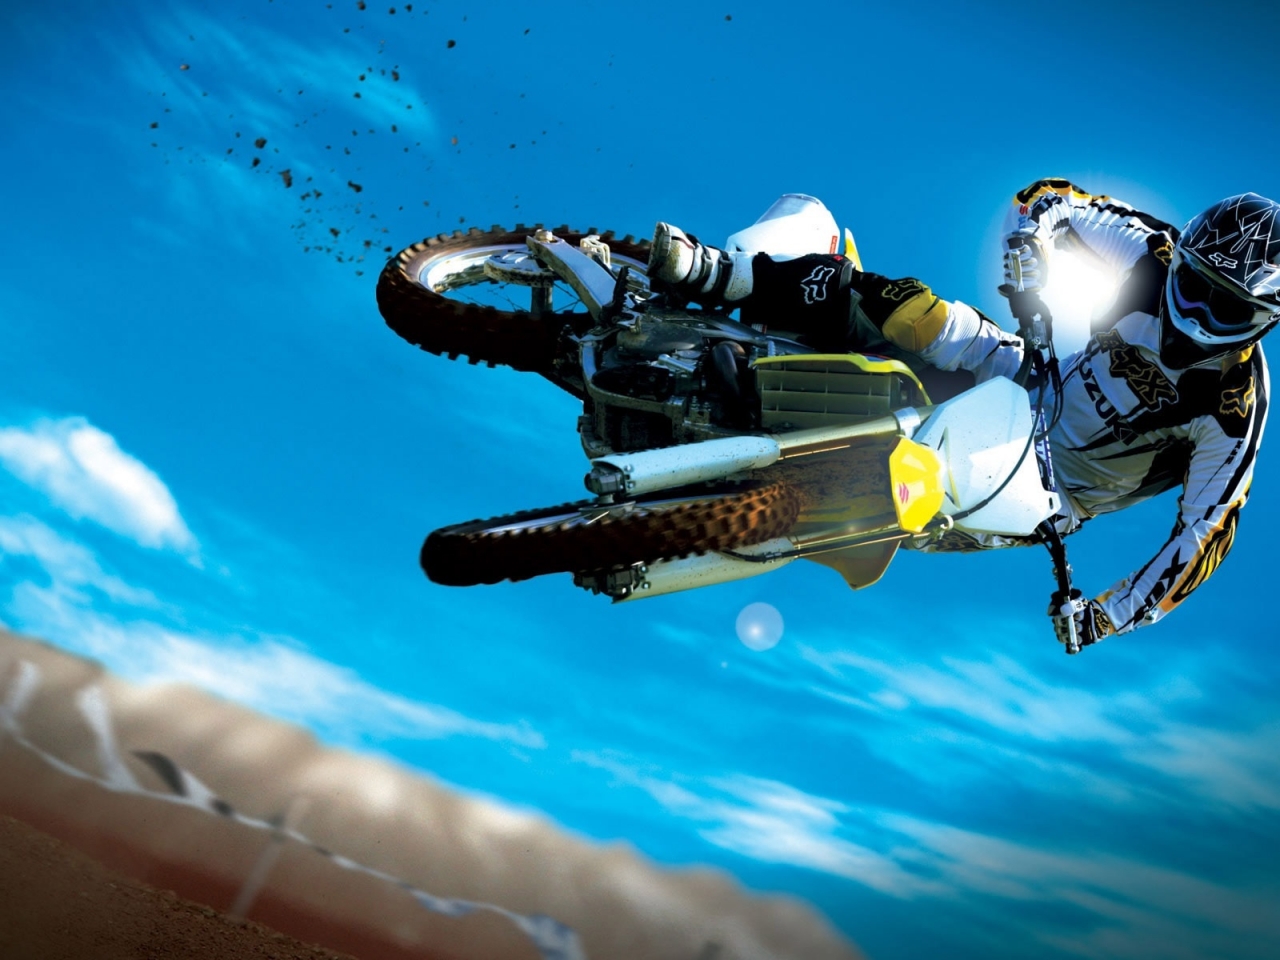 Moto Extreme Sport for 1280 x 960 resolution